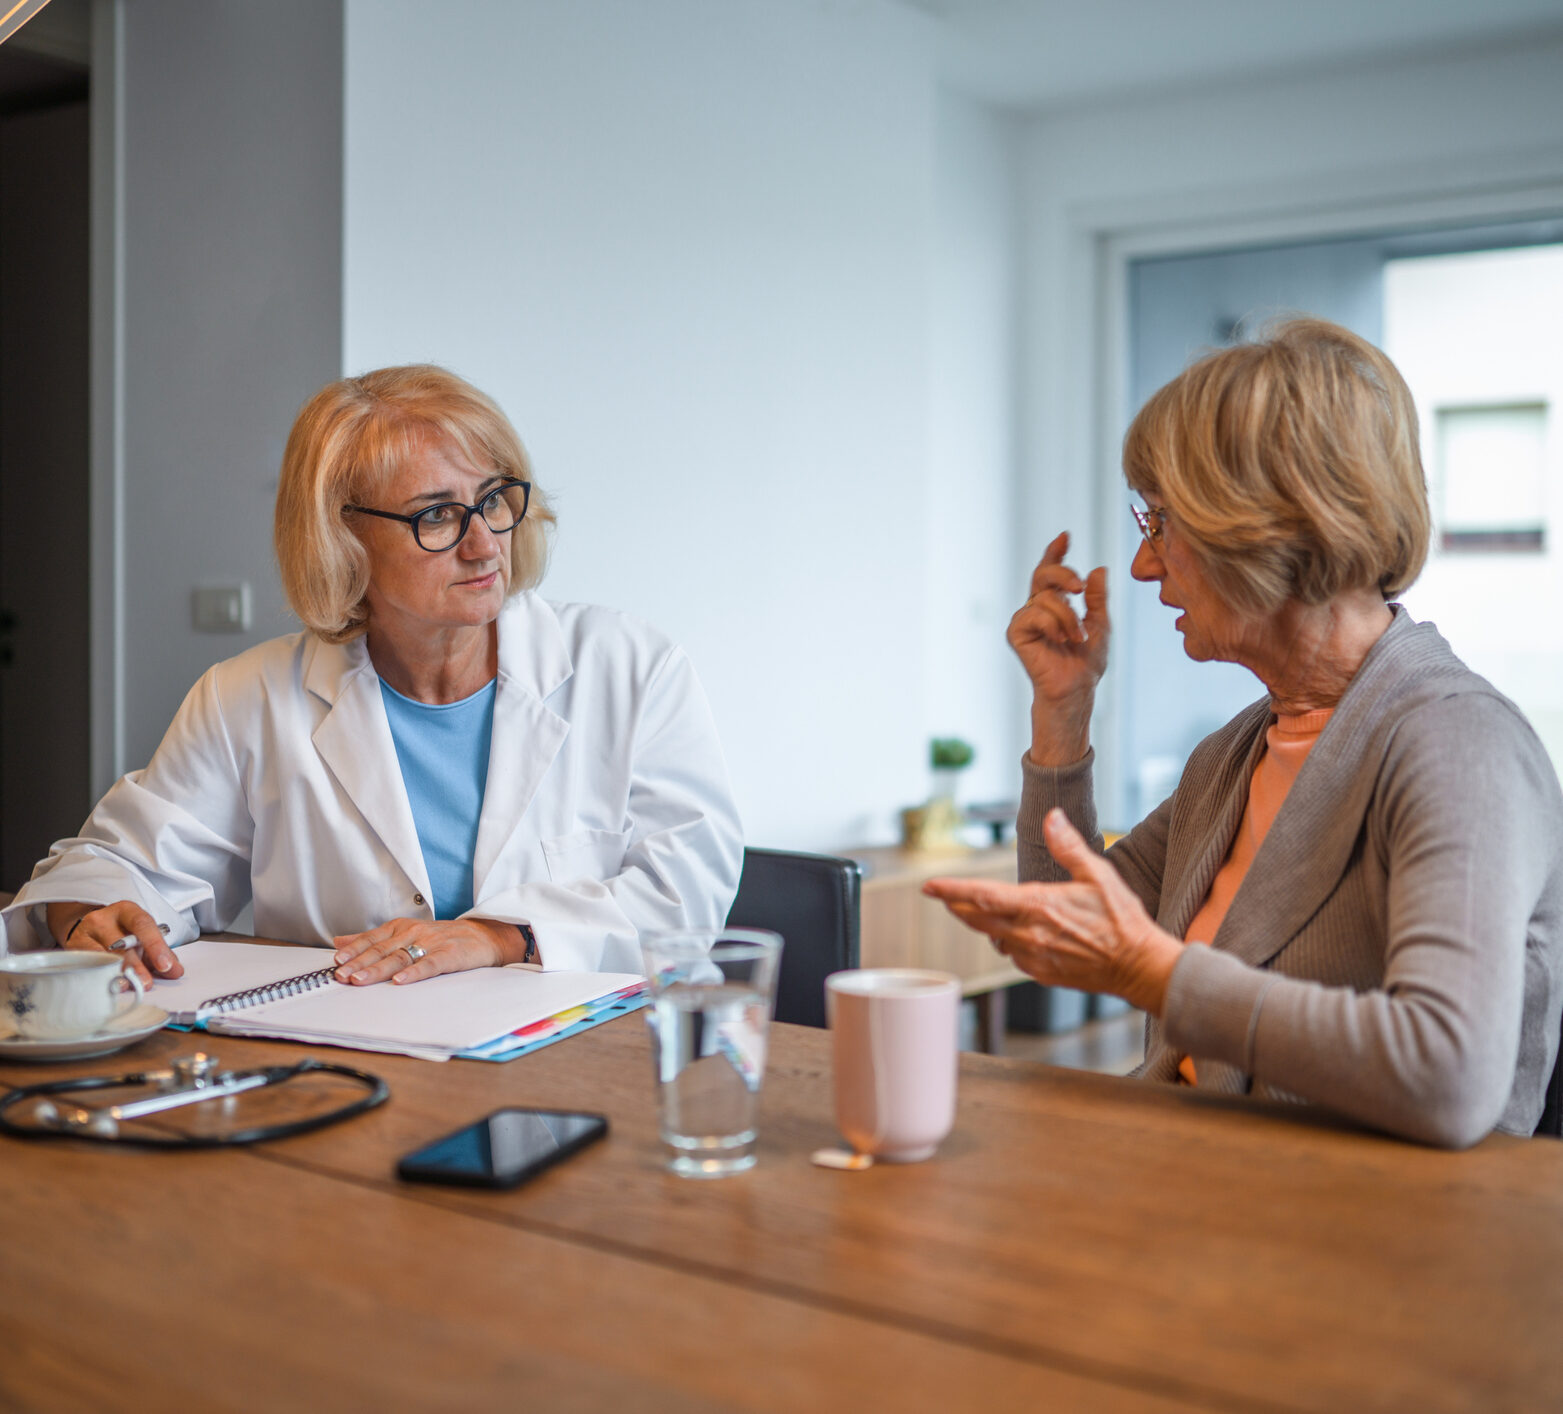 Blonde woman doctor talks to person with diabetes, a blonde woman with glasses, about time in range